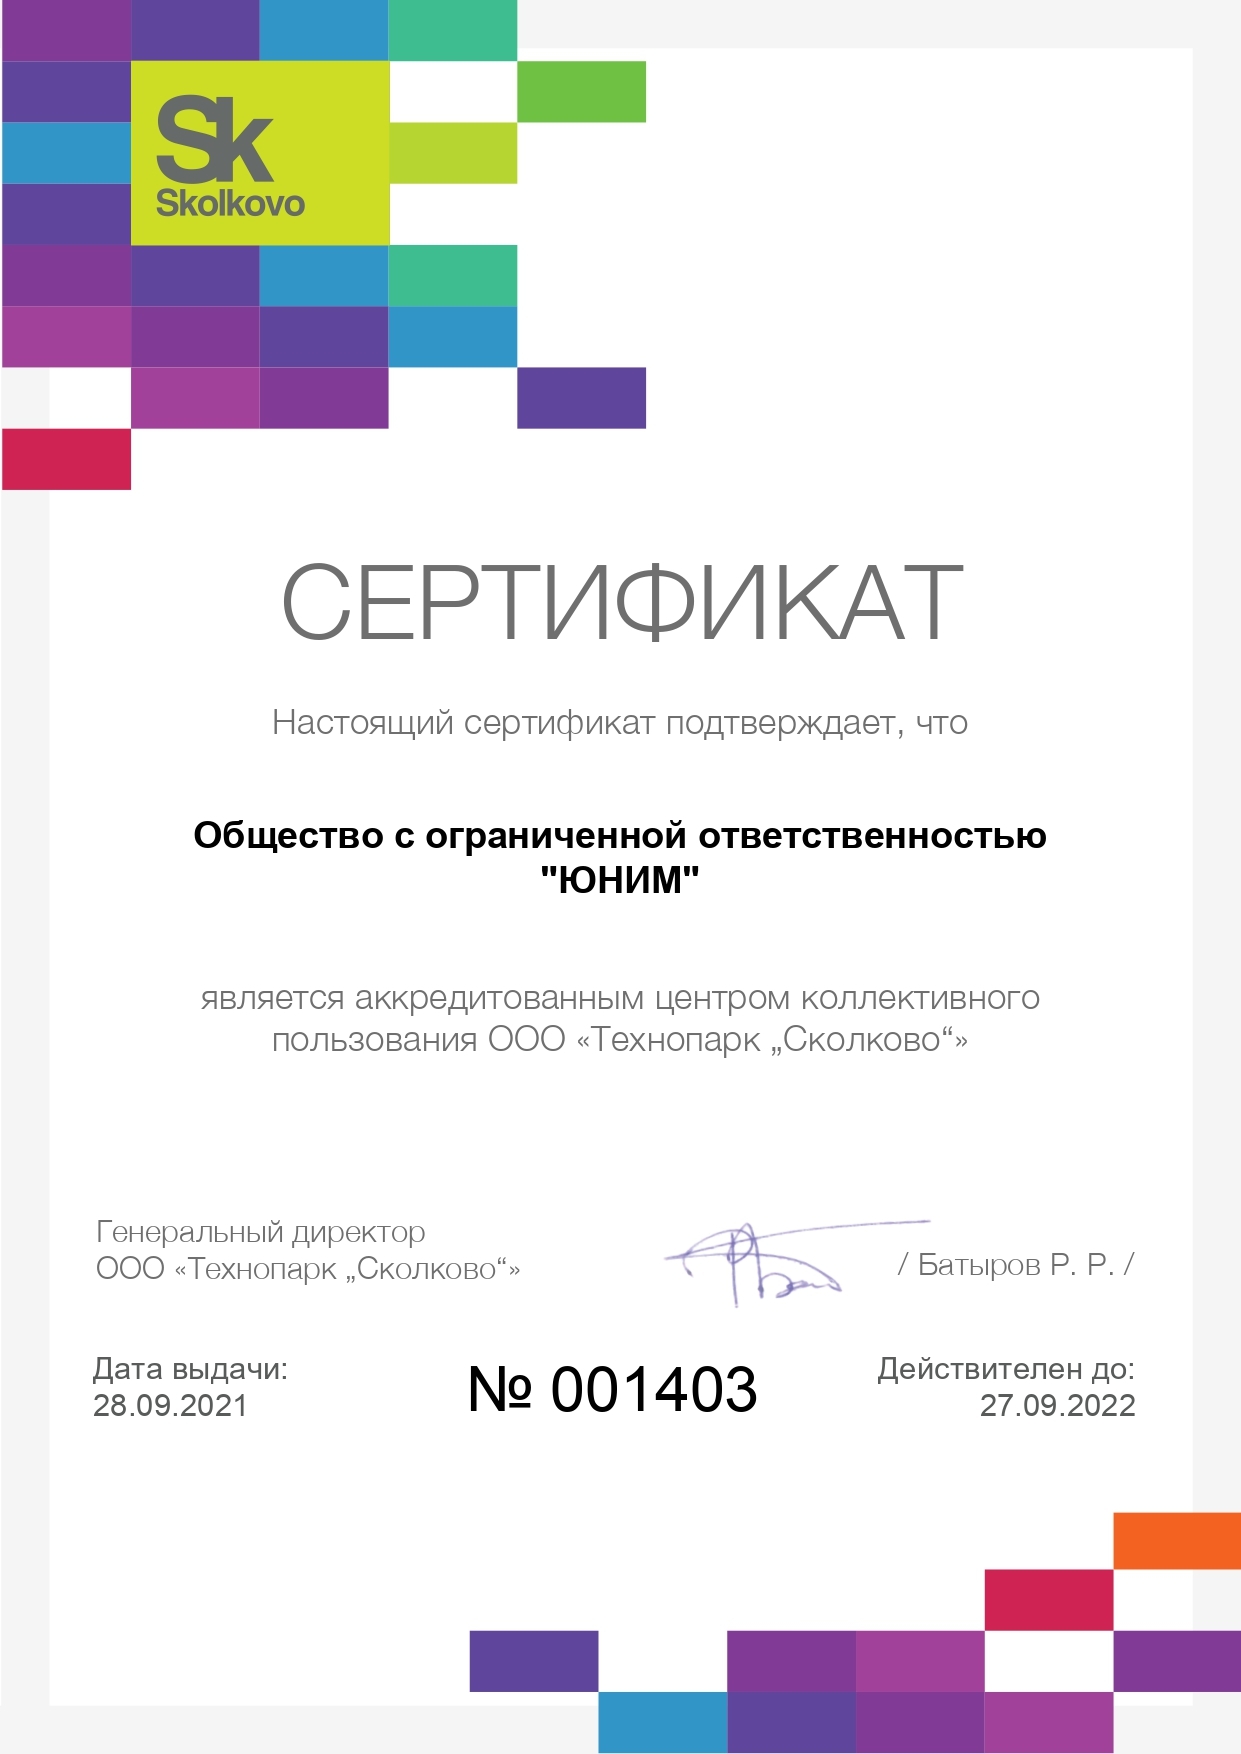 <span  class="uc_style_uc_tiles_grid_image_elementor_uc_items_attribute_title" style="color:#ffffff;">Сертификат Сколково</span>